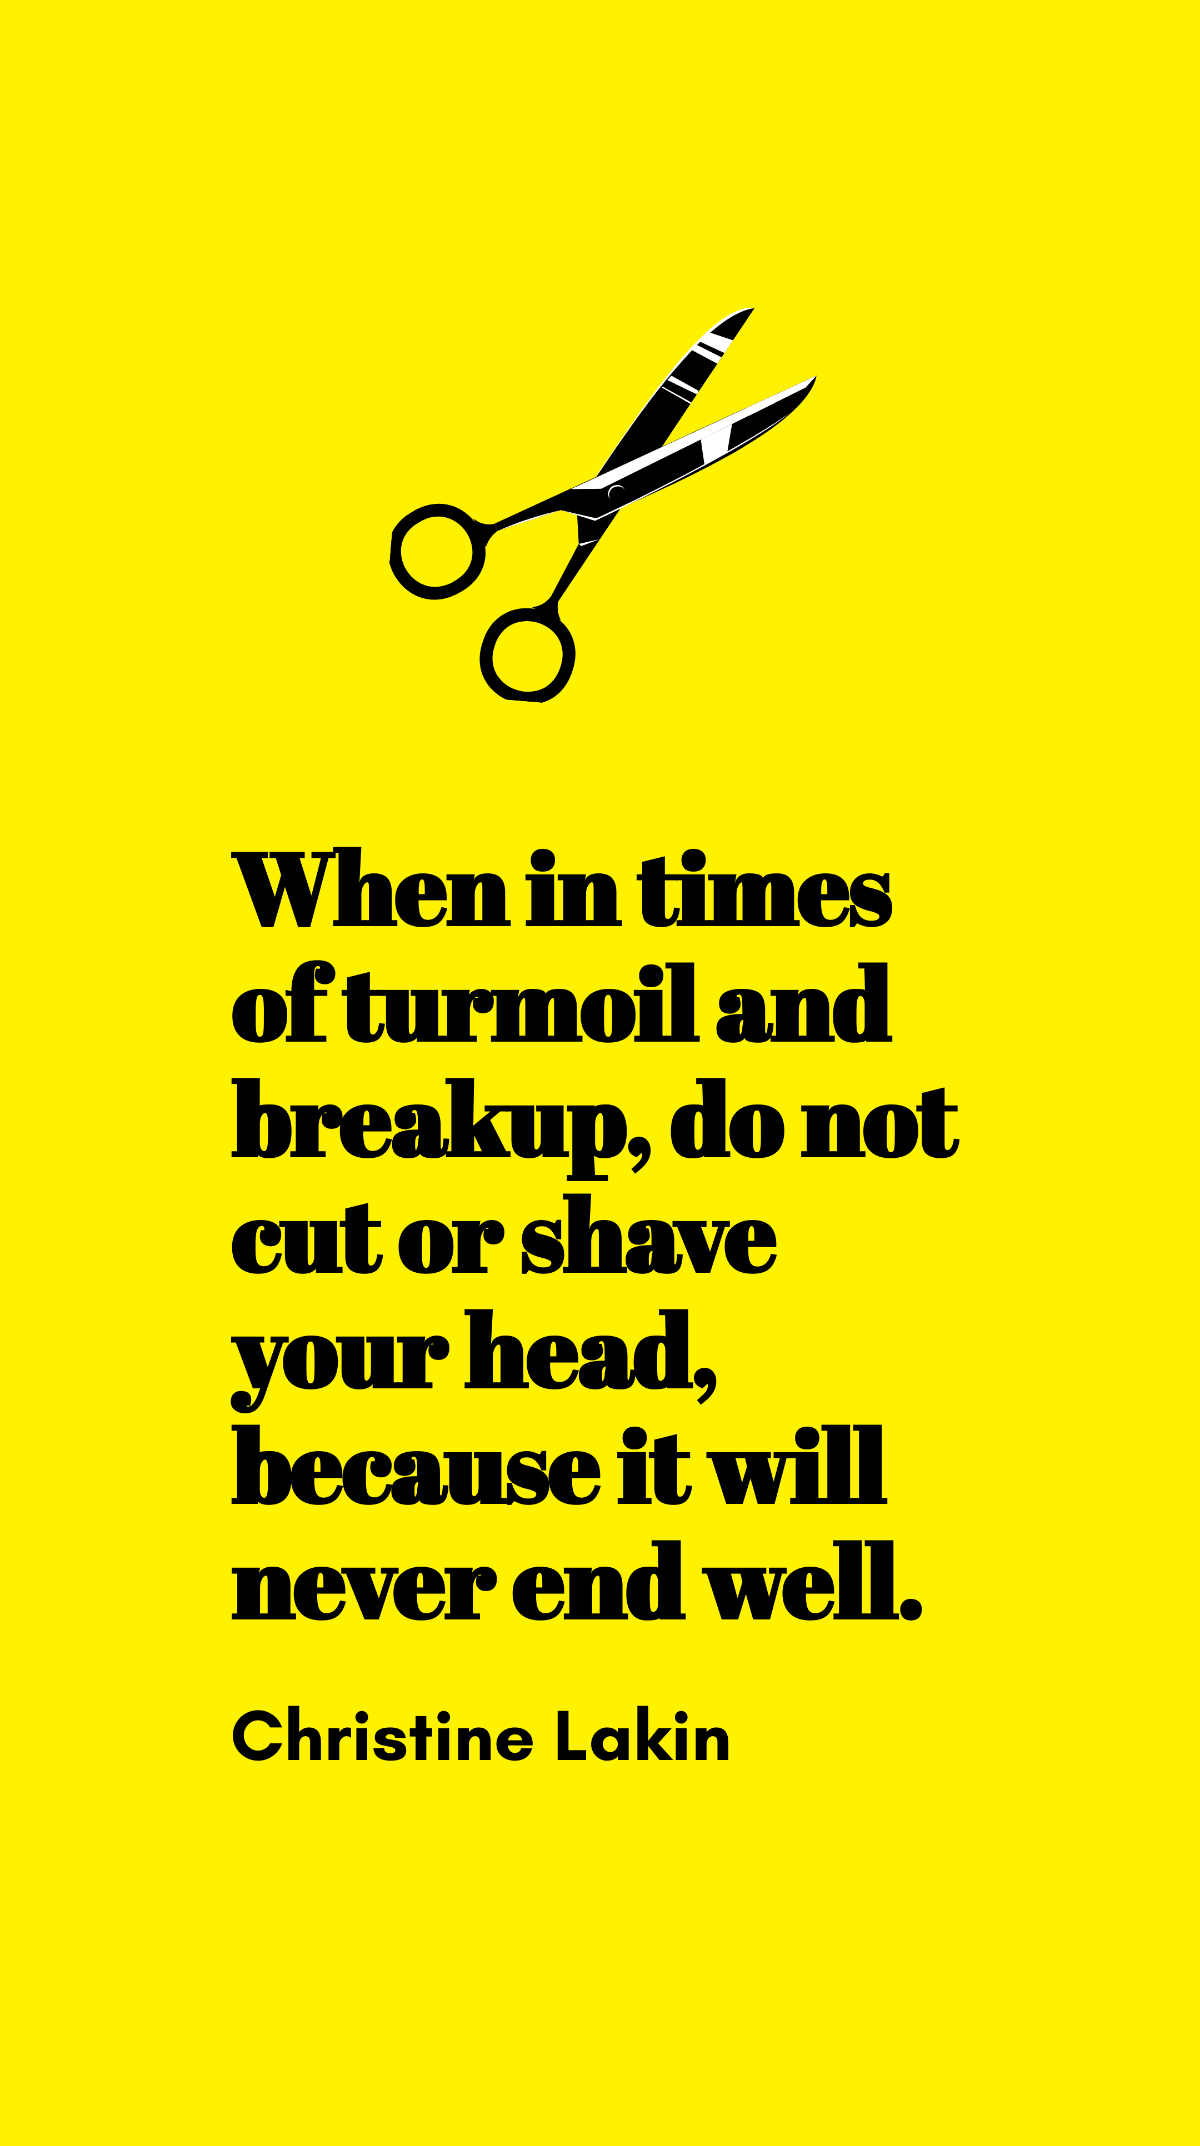 Christine Lakin - When in times of turmoil and breakup, do not cut or shave your head, because it will never end well.